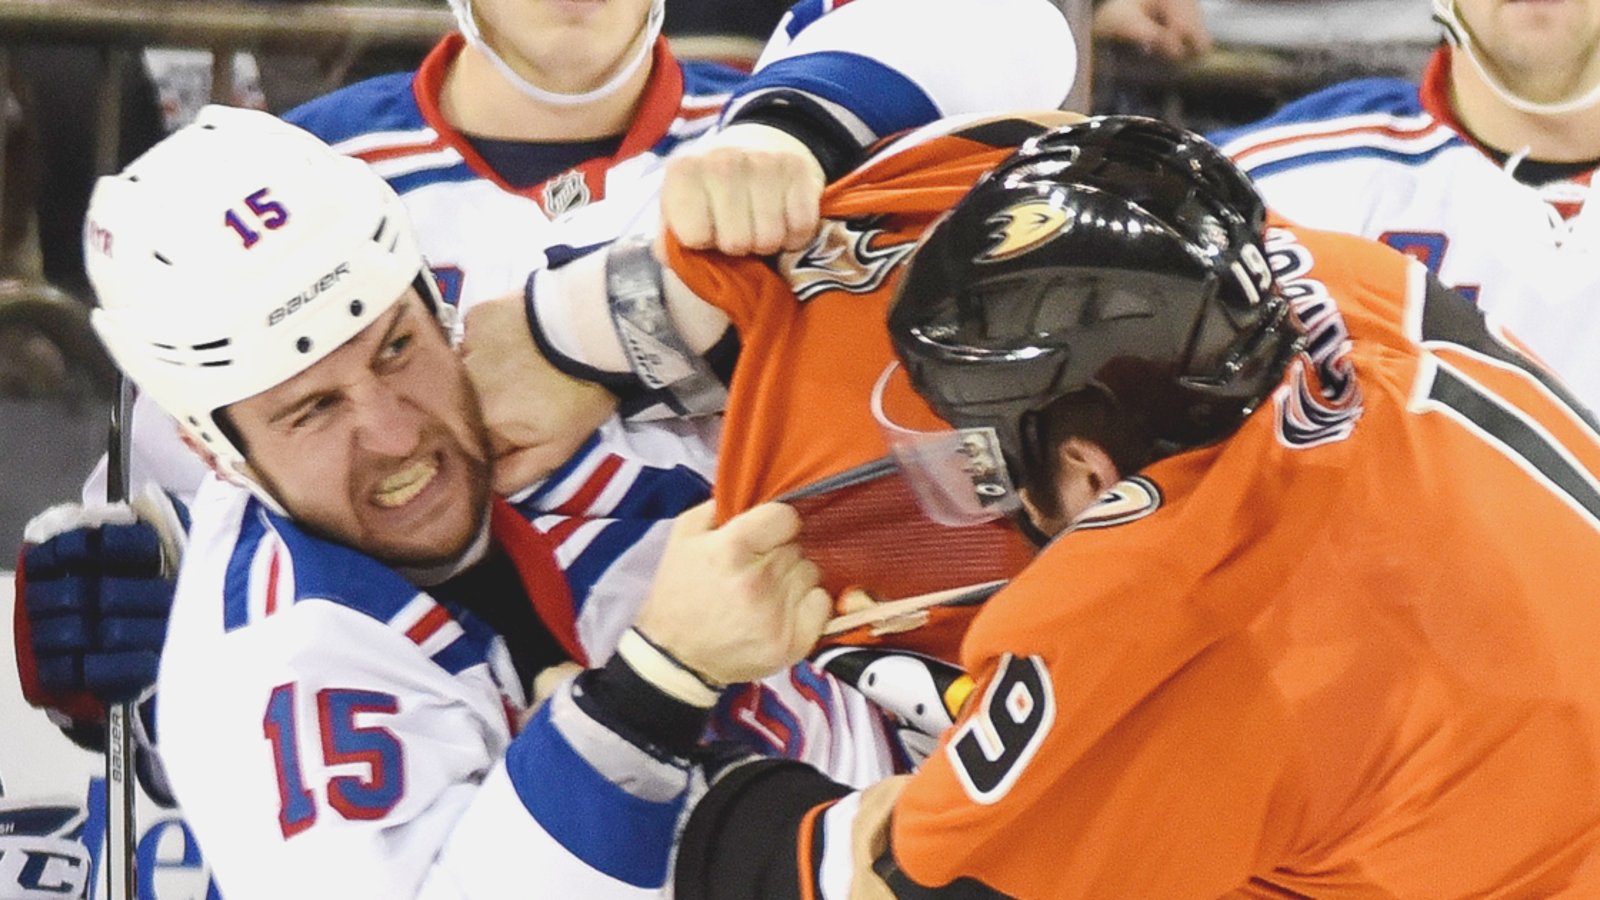 Reporters asked Rangers head coach if Tanner Glass is allowed to fight prior elimination game.